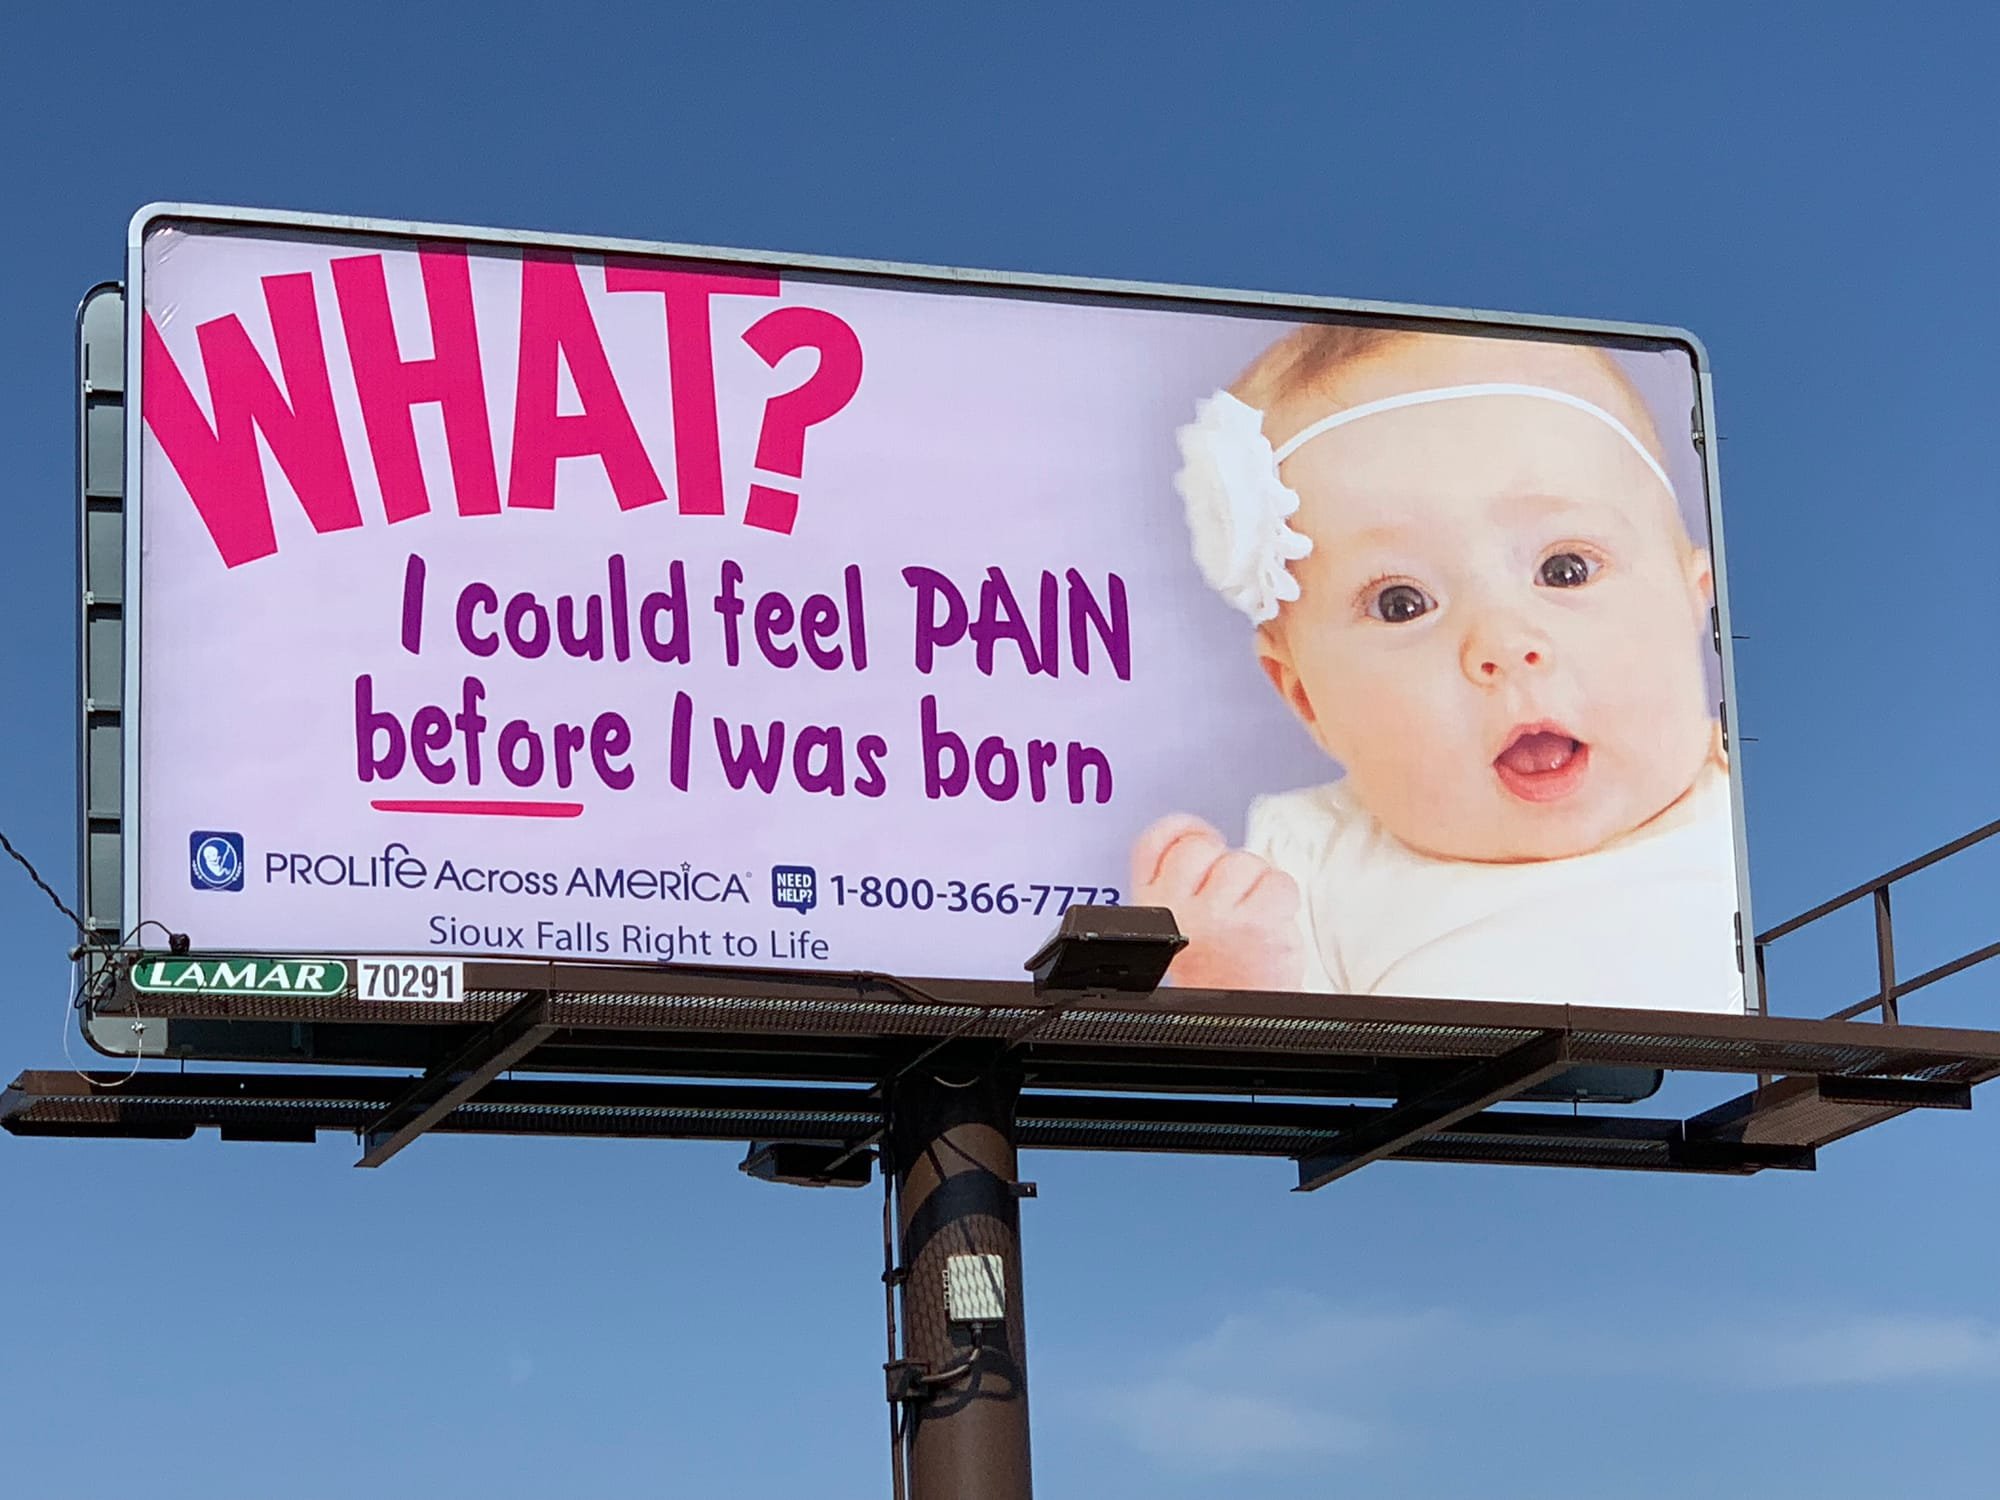 60th Avenue - Designed by Pro Life Across America